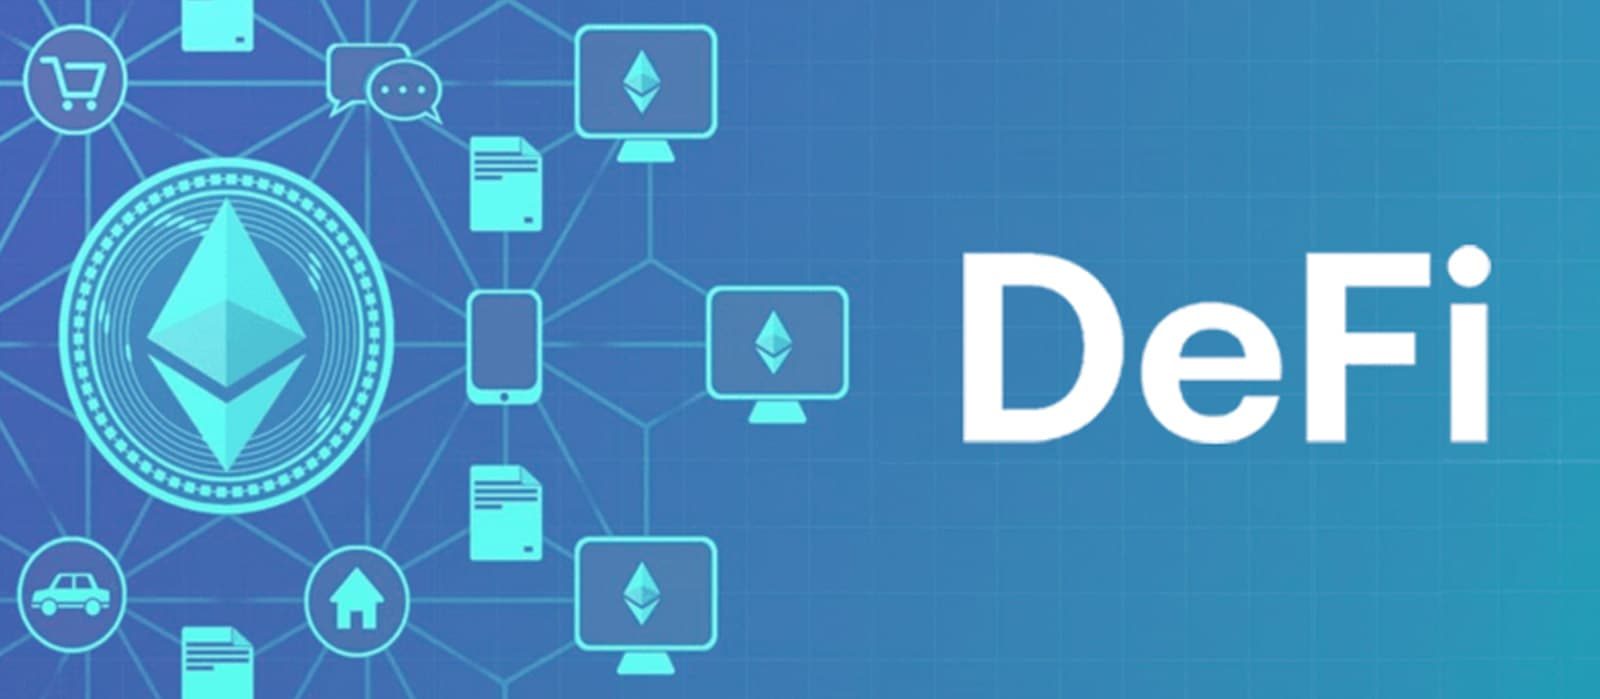 WHAT IS DEFI AND HOW DEFI COULD HELP NIGERIAN BUSINESSES